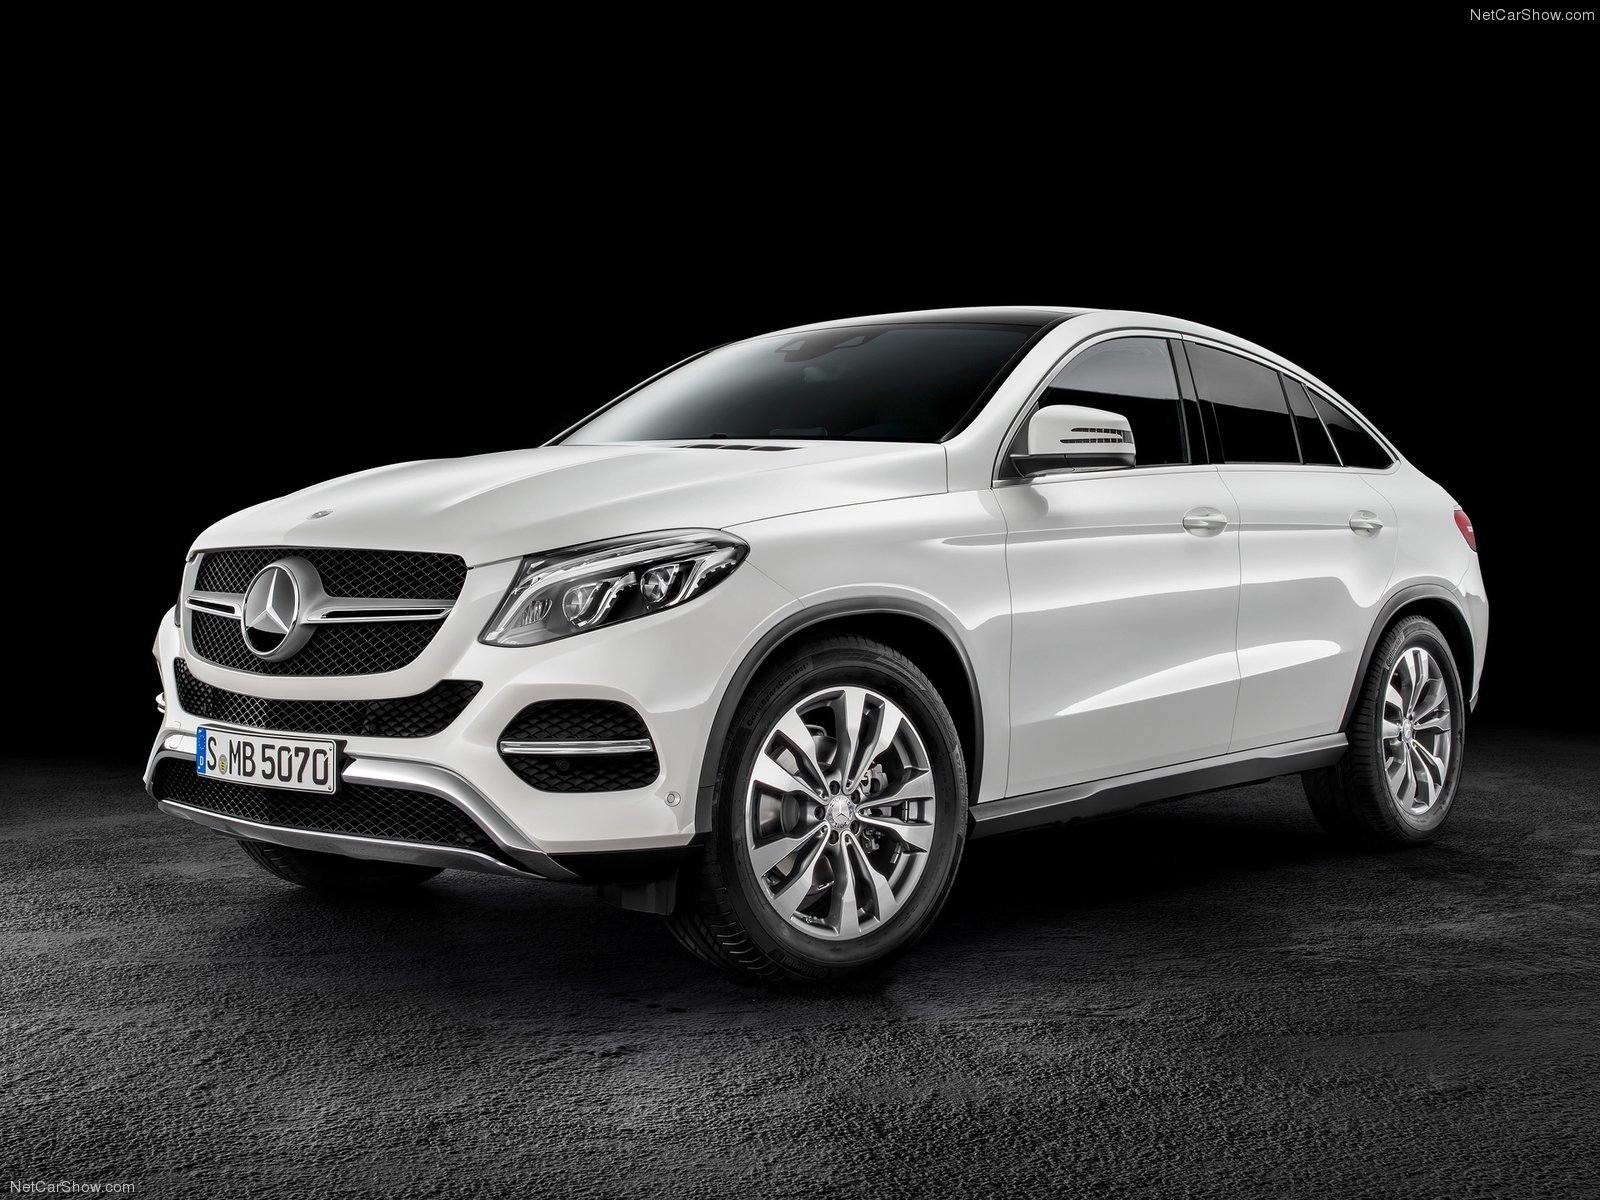 c292 , 2015, Awd, Benz, Coupe, Gle, Mercedes, Suv Wallpaper